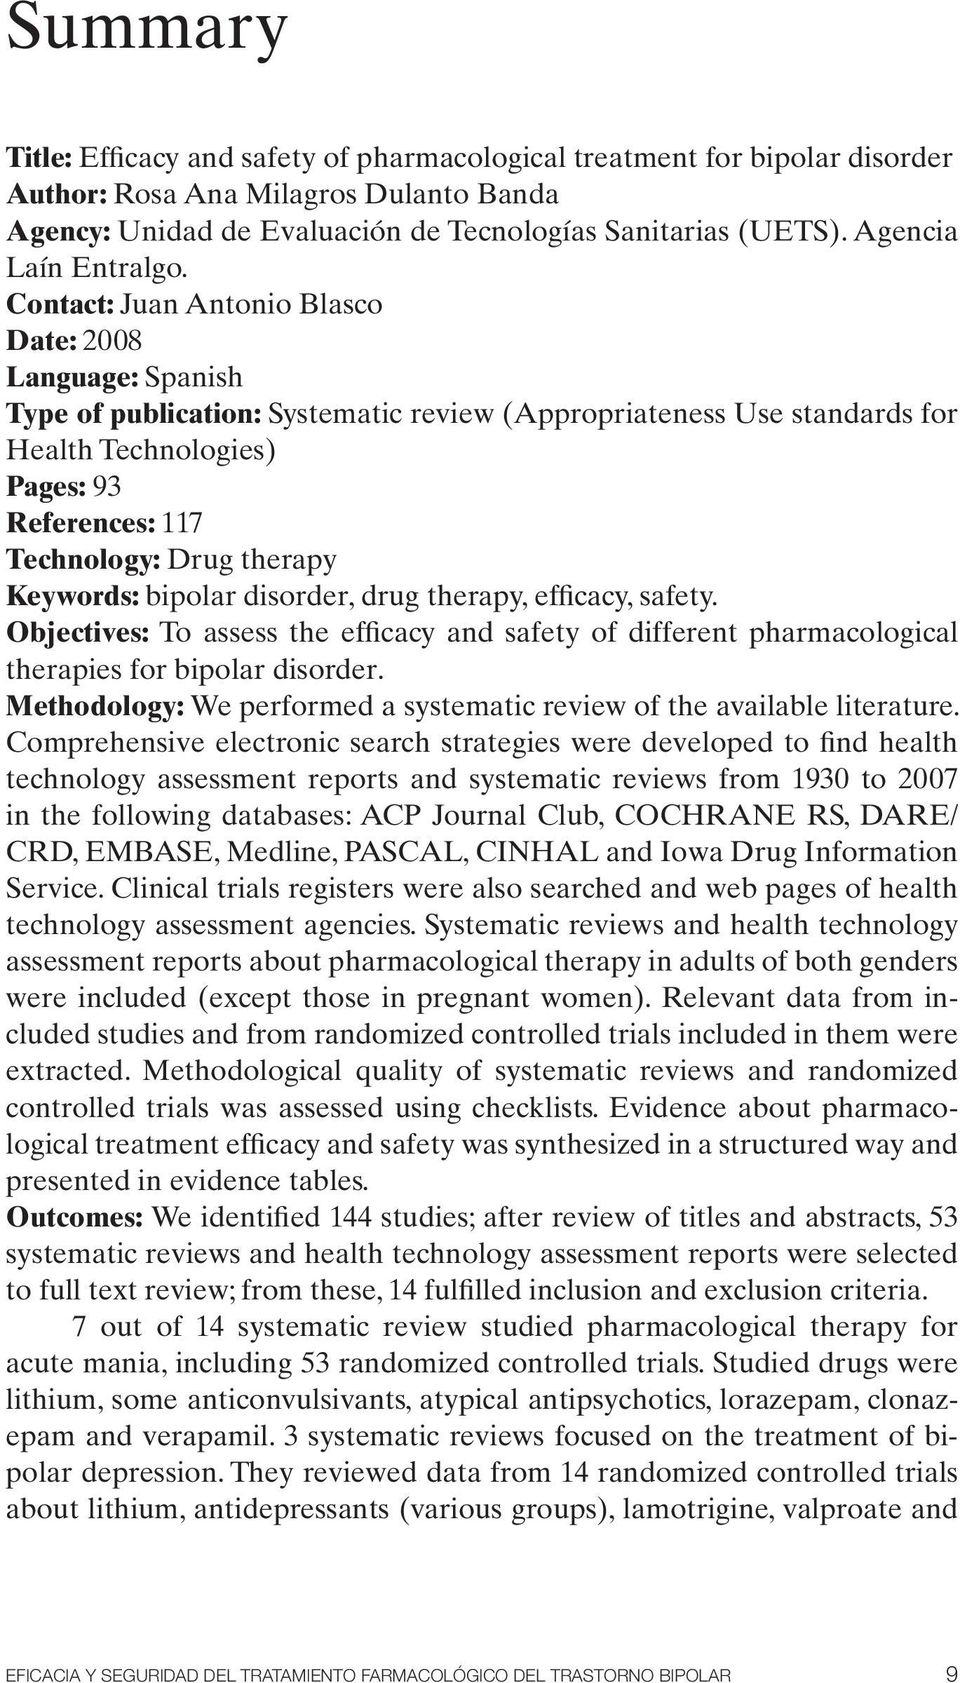 Contact: Juan Antonio Blasco Date: 2008 Language: Spanish Type of publication: Systematic review (Appropriateness Use standards for Health Technologies) Pages: 93 References: 117 Technology: Drug